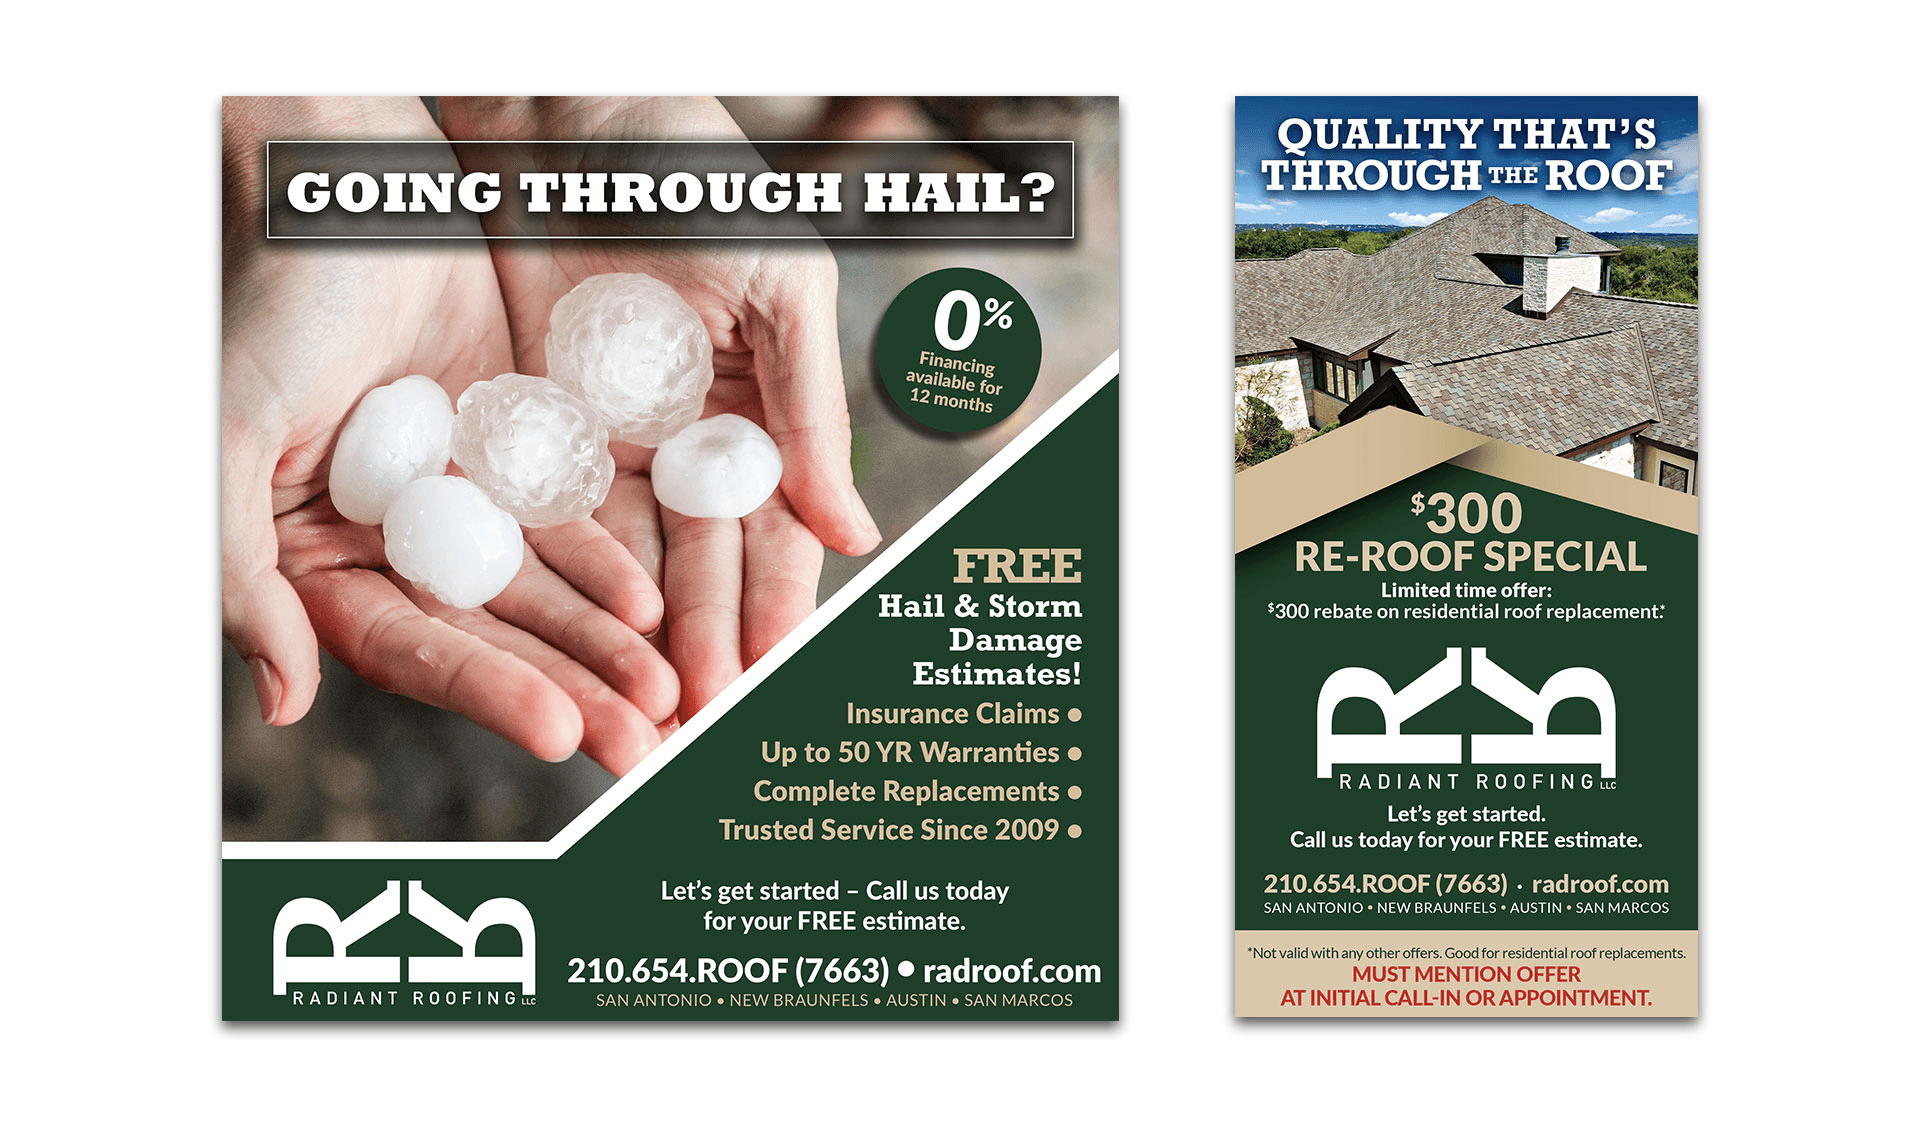 Radiant Roofing Newspaper Ads